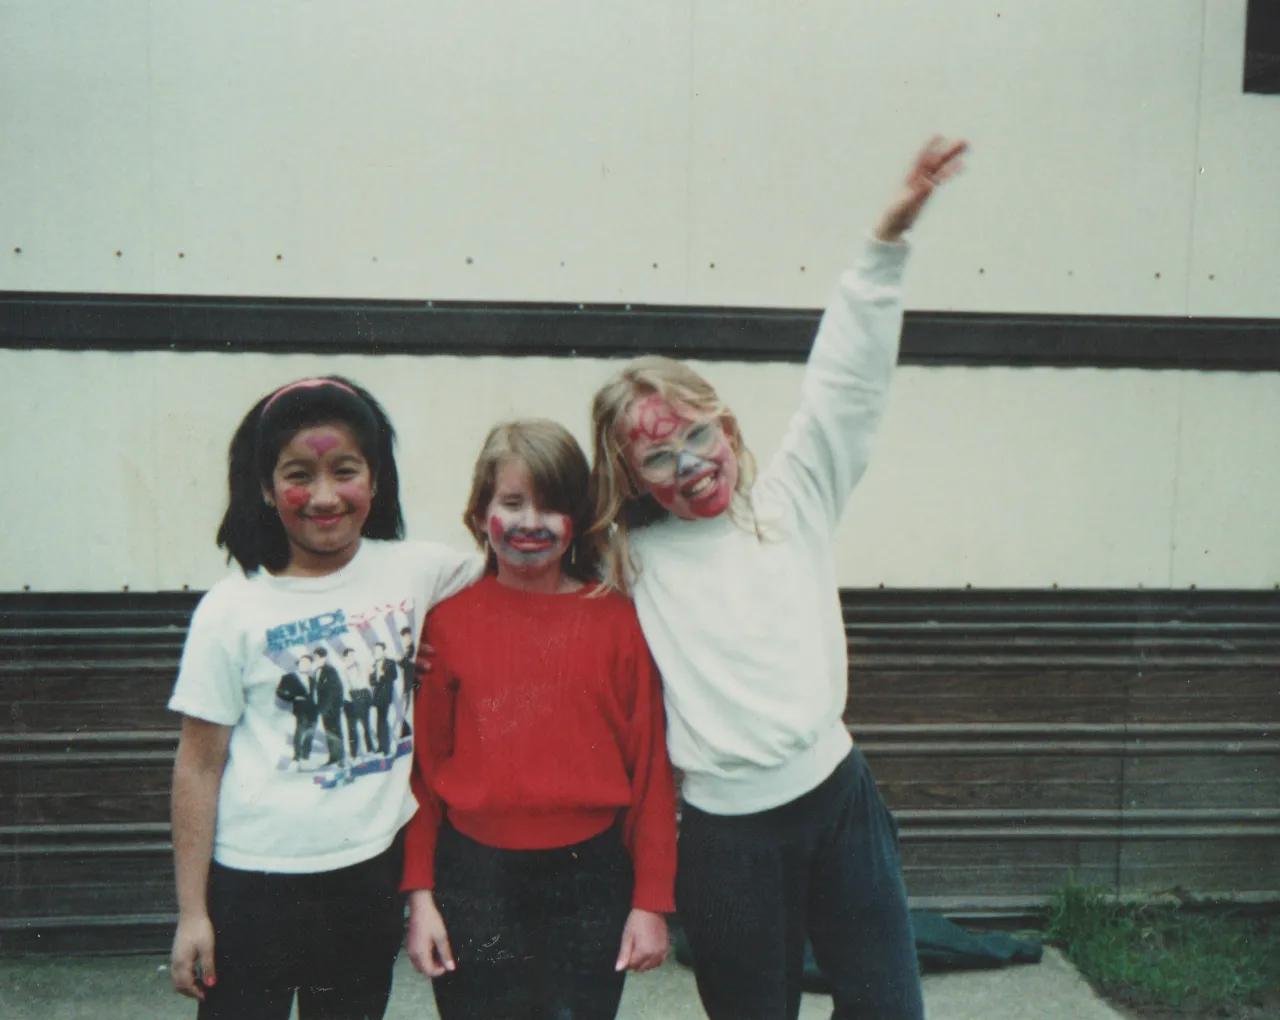 1992 Katie Jennifer & 3rd girl FACE PAINT apx date.png